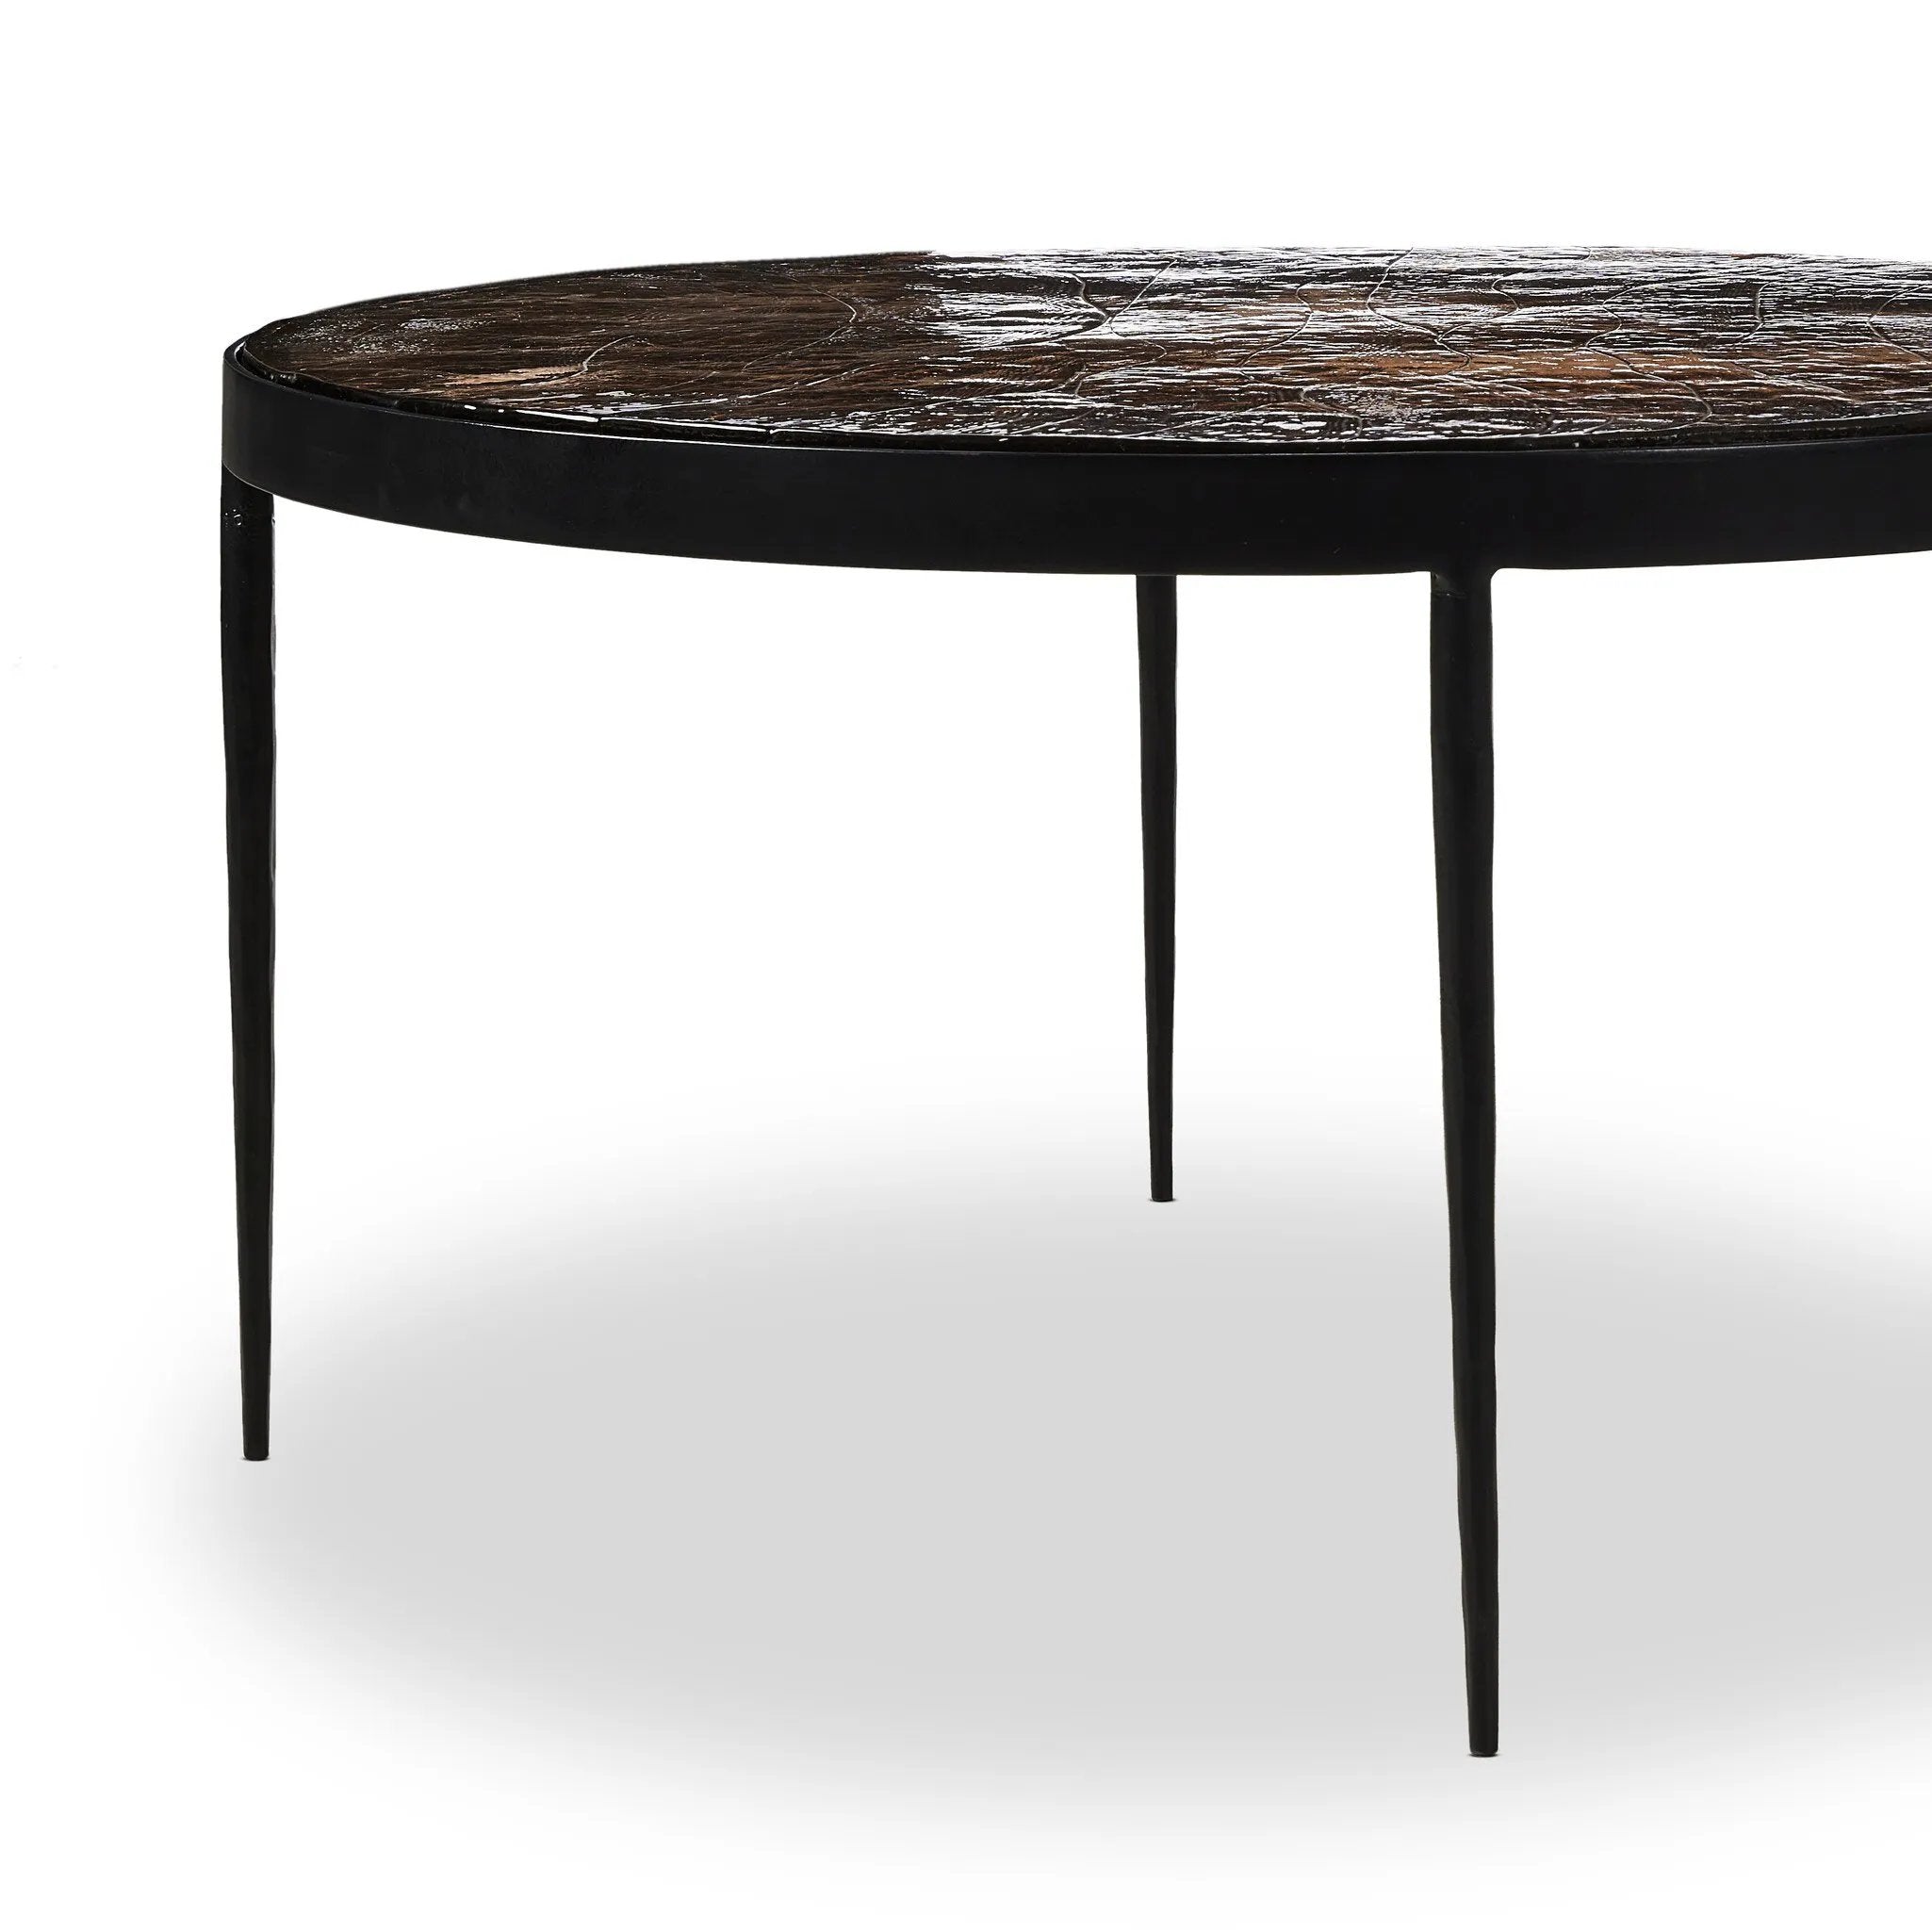 Smoky brown glass-topped table with slim, tapered matte black metal frames for a sleek, modern look. Part of a nesting set, can be used alone or paired with its smaller counterpart.Collection: Marlo Amethyst Home provides interior design, new home construction design consulting, vintage area rugs, and lighting in the Winter Garden metro area.